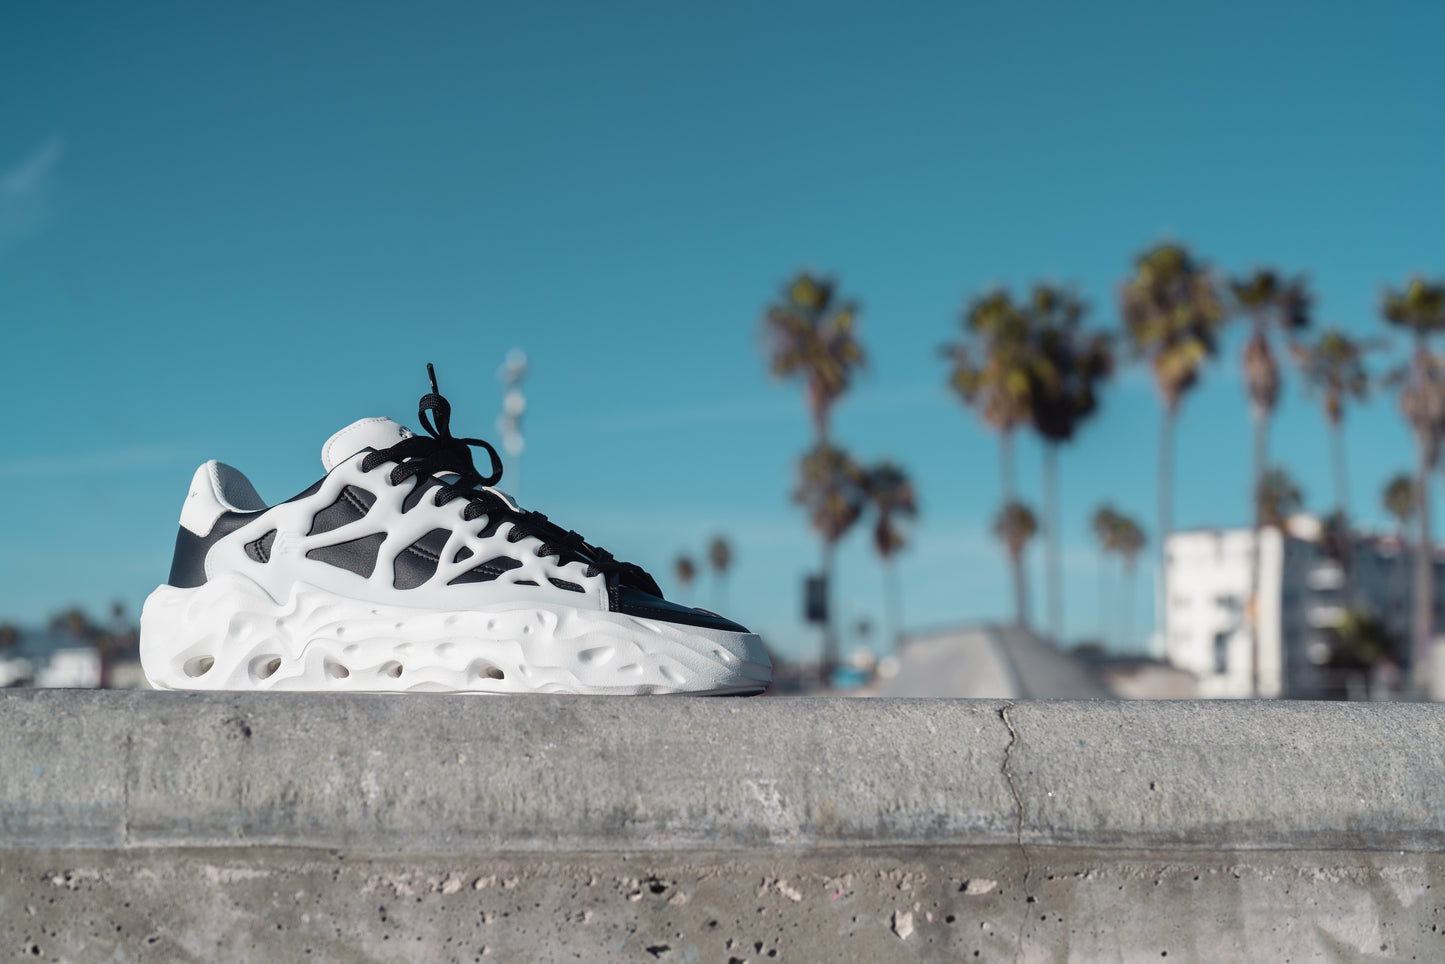 Flowers For Society Sneaker Radicle Orca black white lateral on a concrete bench street palm trees in the background